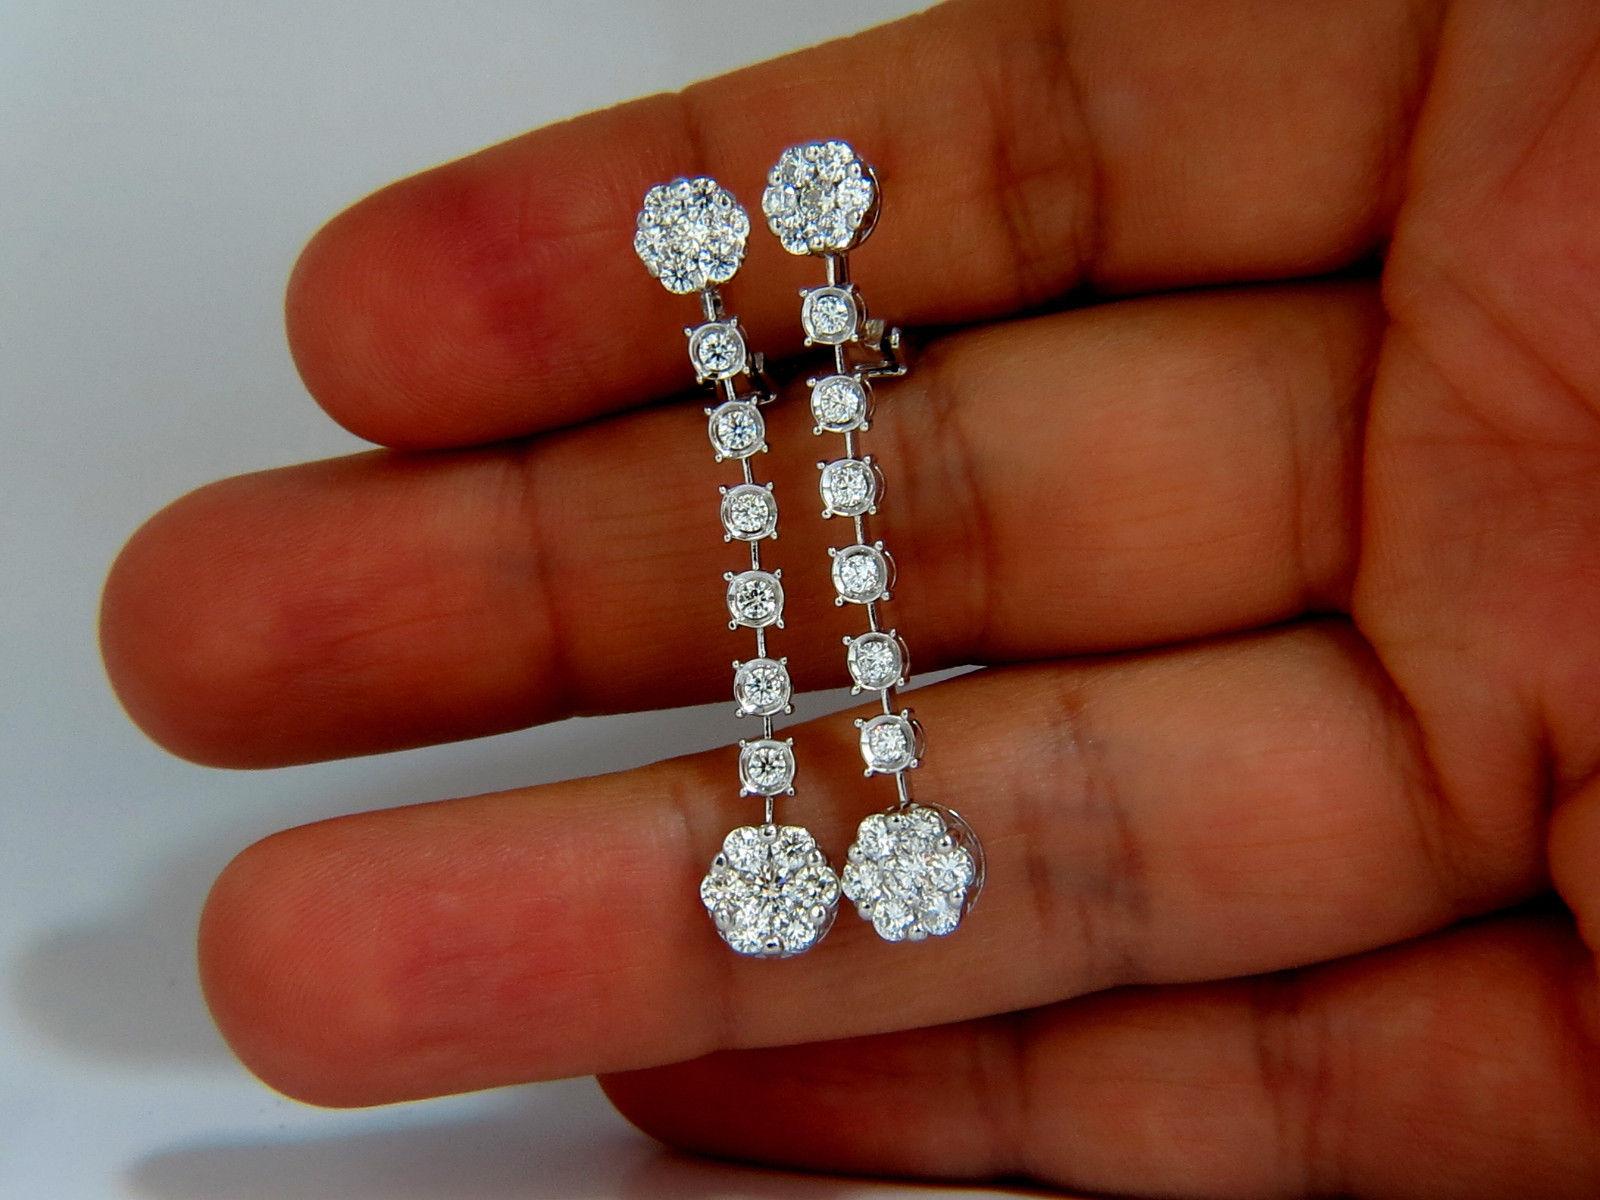 Floating, rounds double clustered dangle earrings.

The Edwardian Revival.

1.70cts of natural round diamonds: 

G-color, Vs-2 clarity.

14kt. white gold

6.9 grams.

Earrings measure: 43.5mm long (1.7 Inch)

7.5mm (.29 inch) diameter on lower